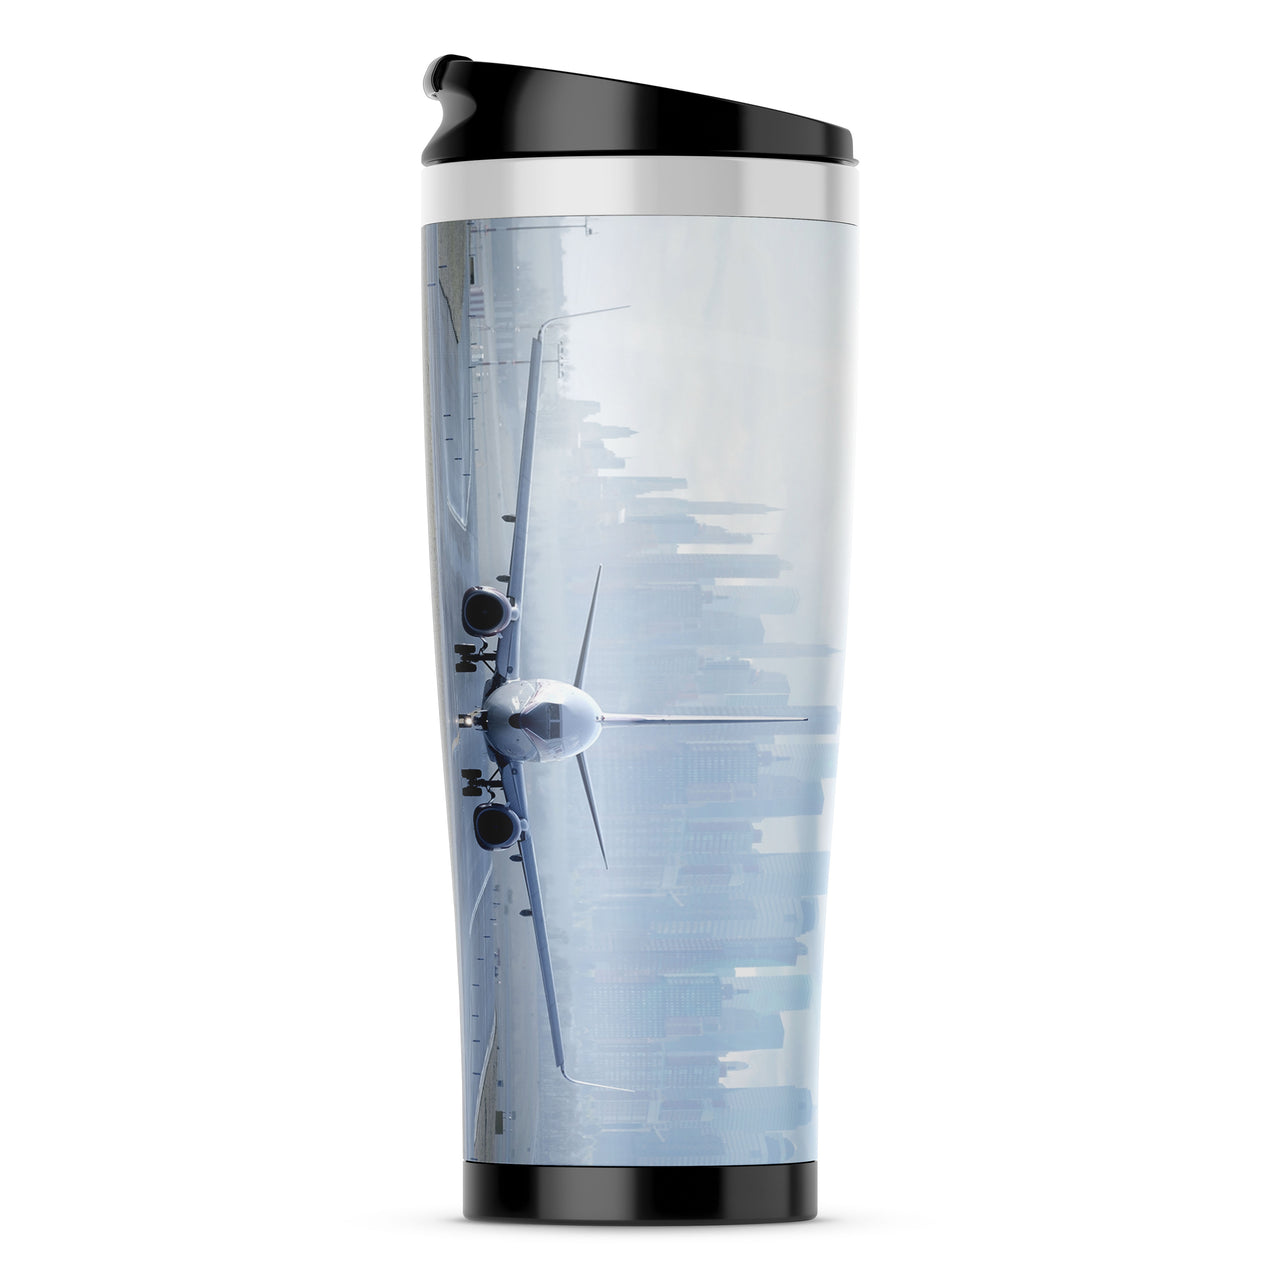 Boeing 737 & City View Behind copy Designed Travel Mugs